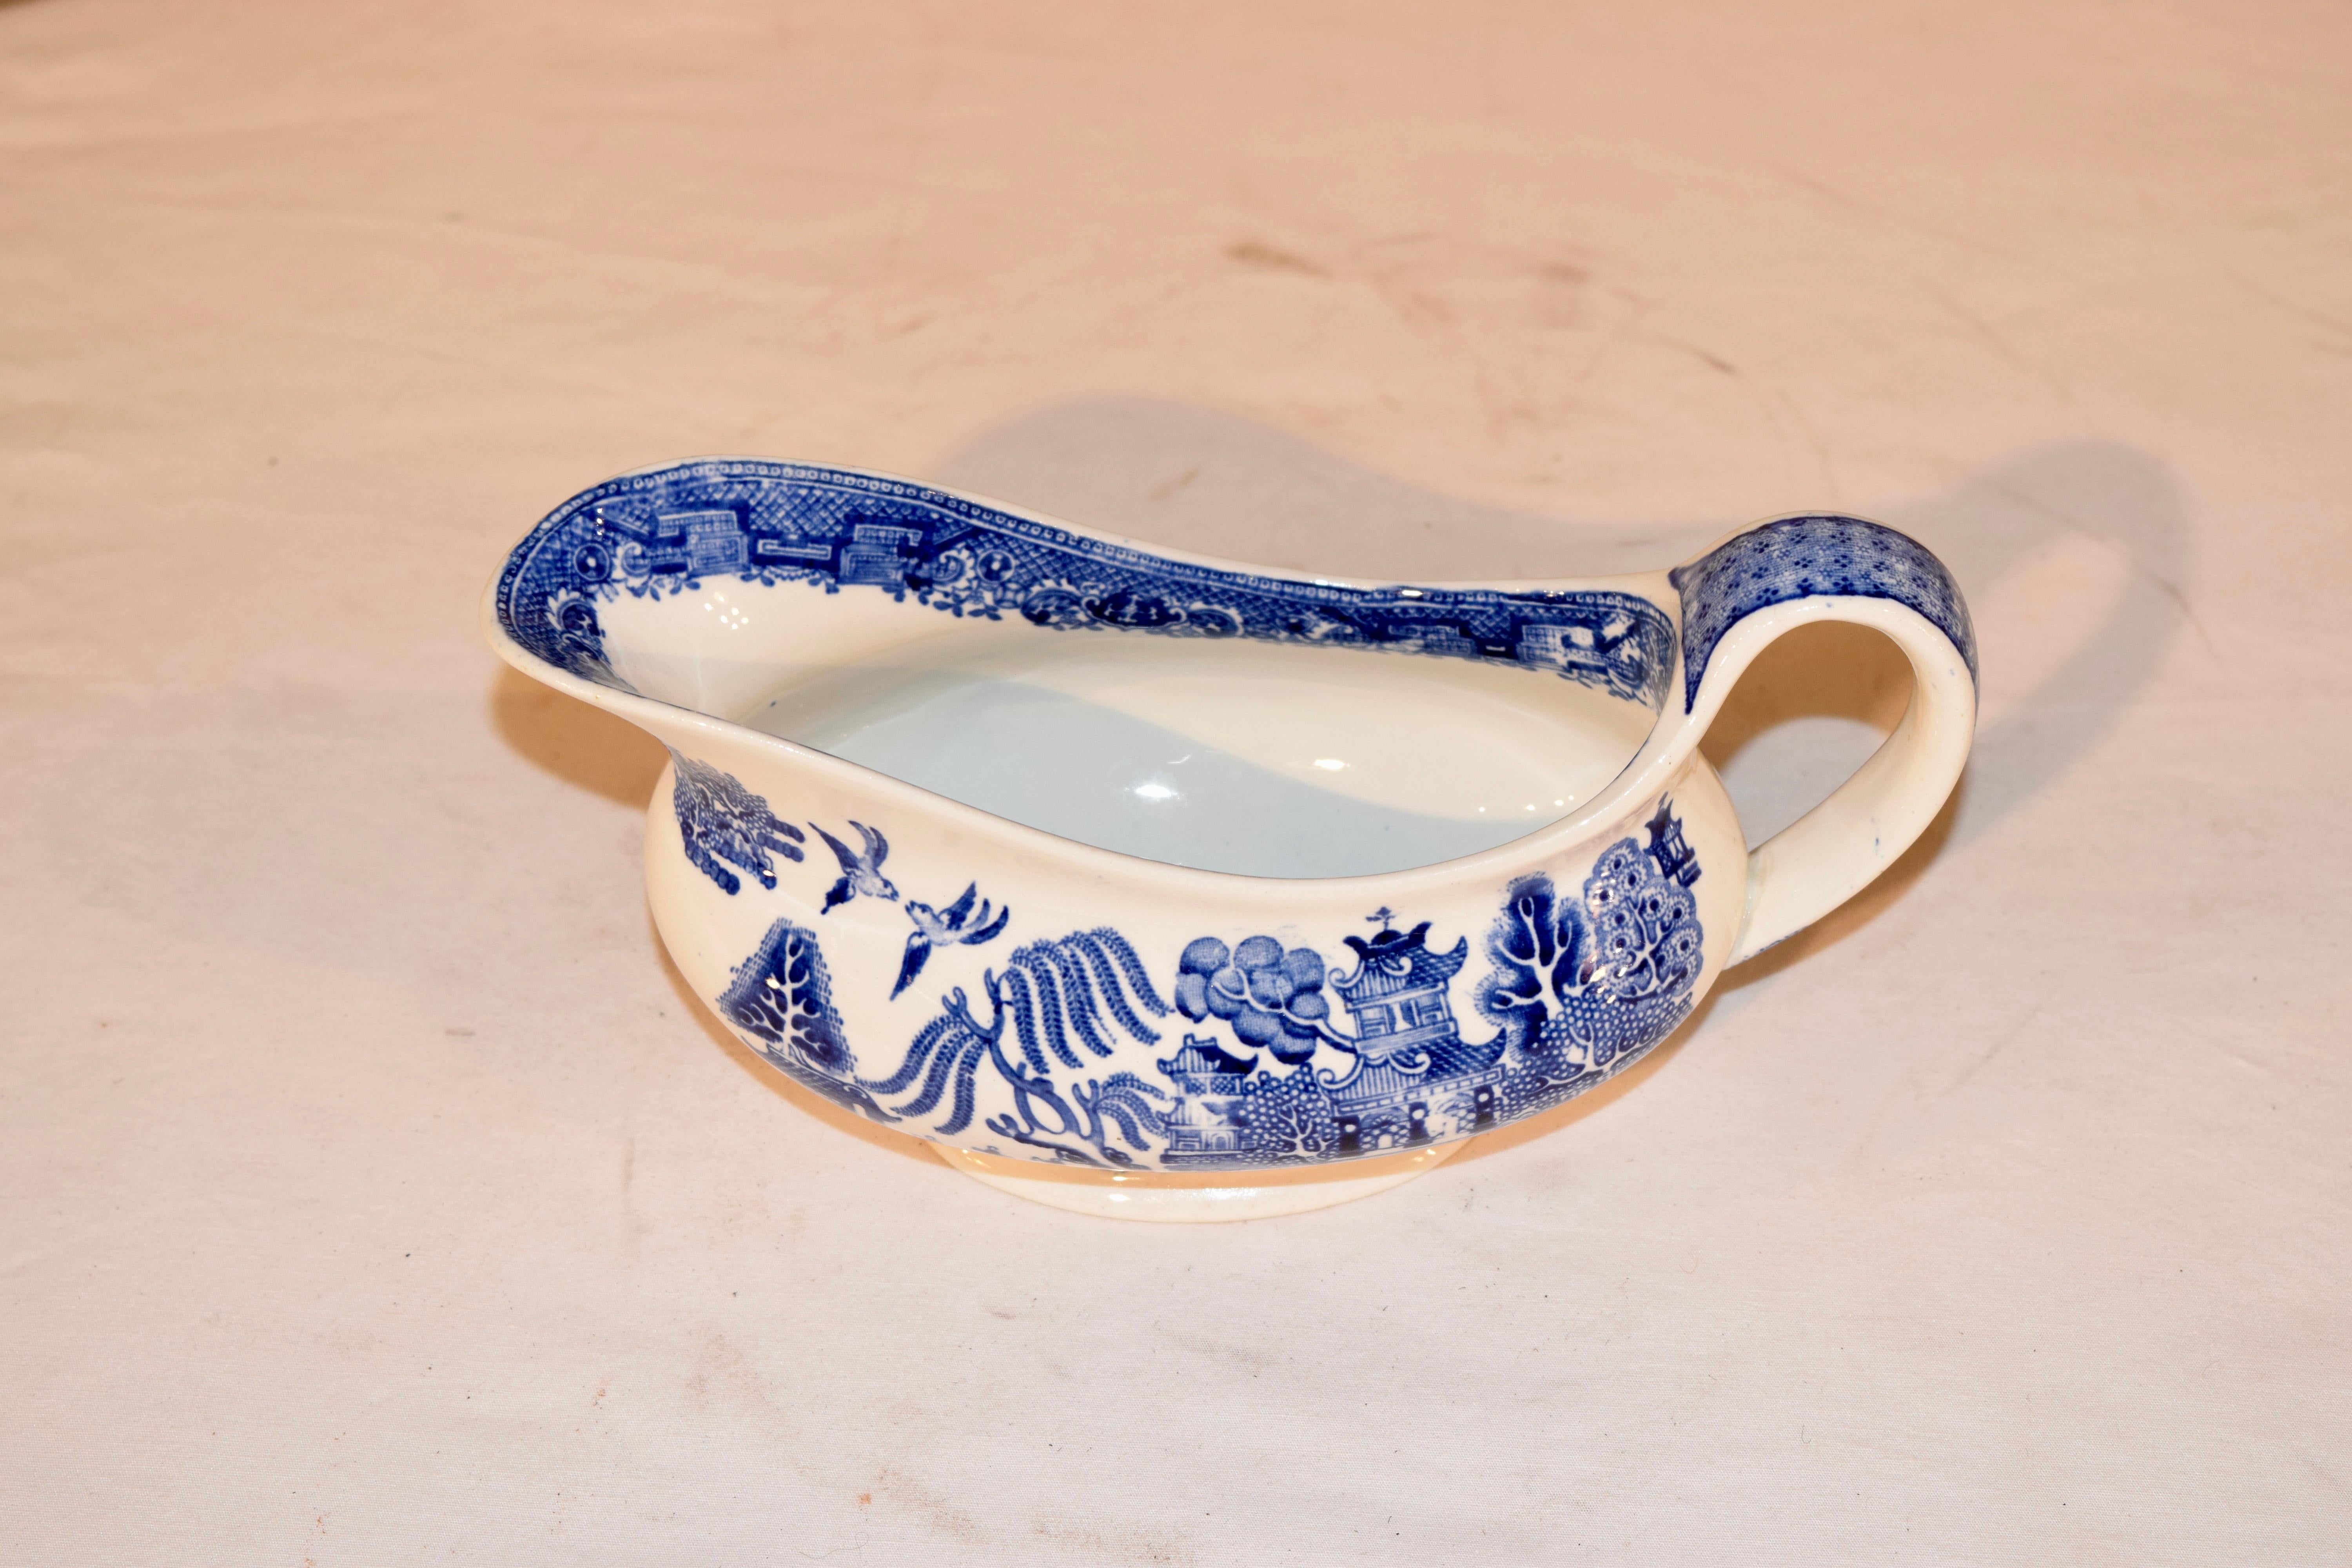 Late 19th century English pottery gravy boat in the famous blue willow pattern. Maker's mark is for William Adams and Sons, which were located in Tunstall.